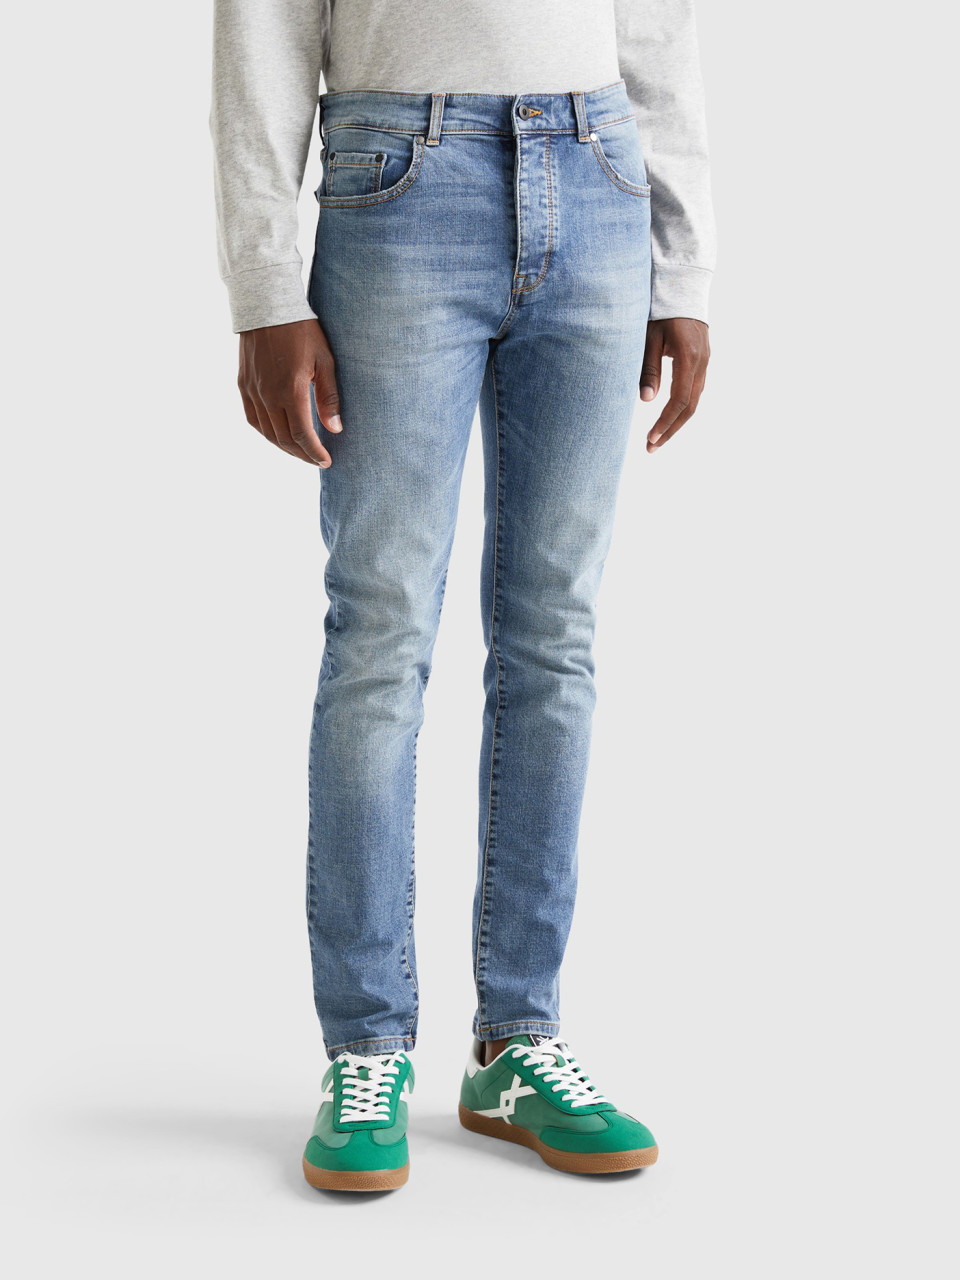 Benetton, Jeans Coupe Skinny, Bleu Clair, Homme